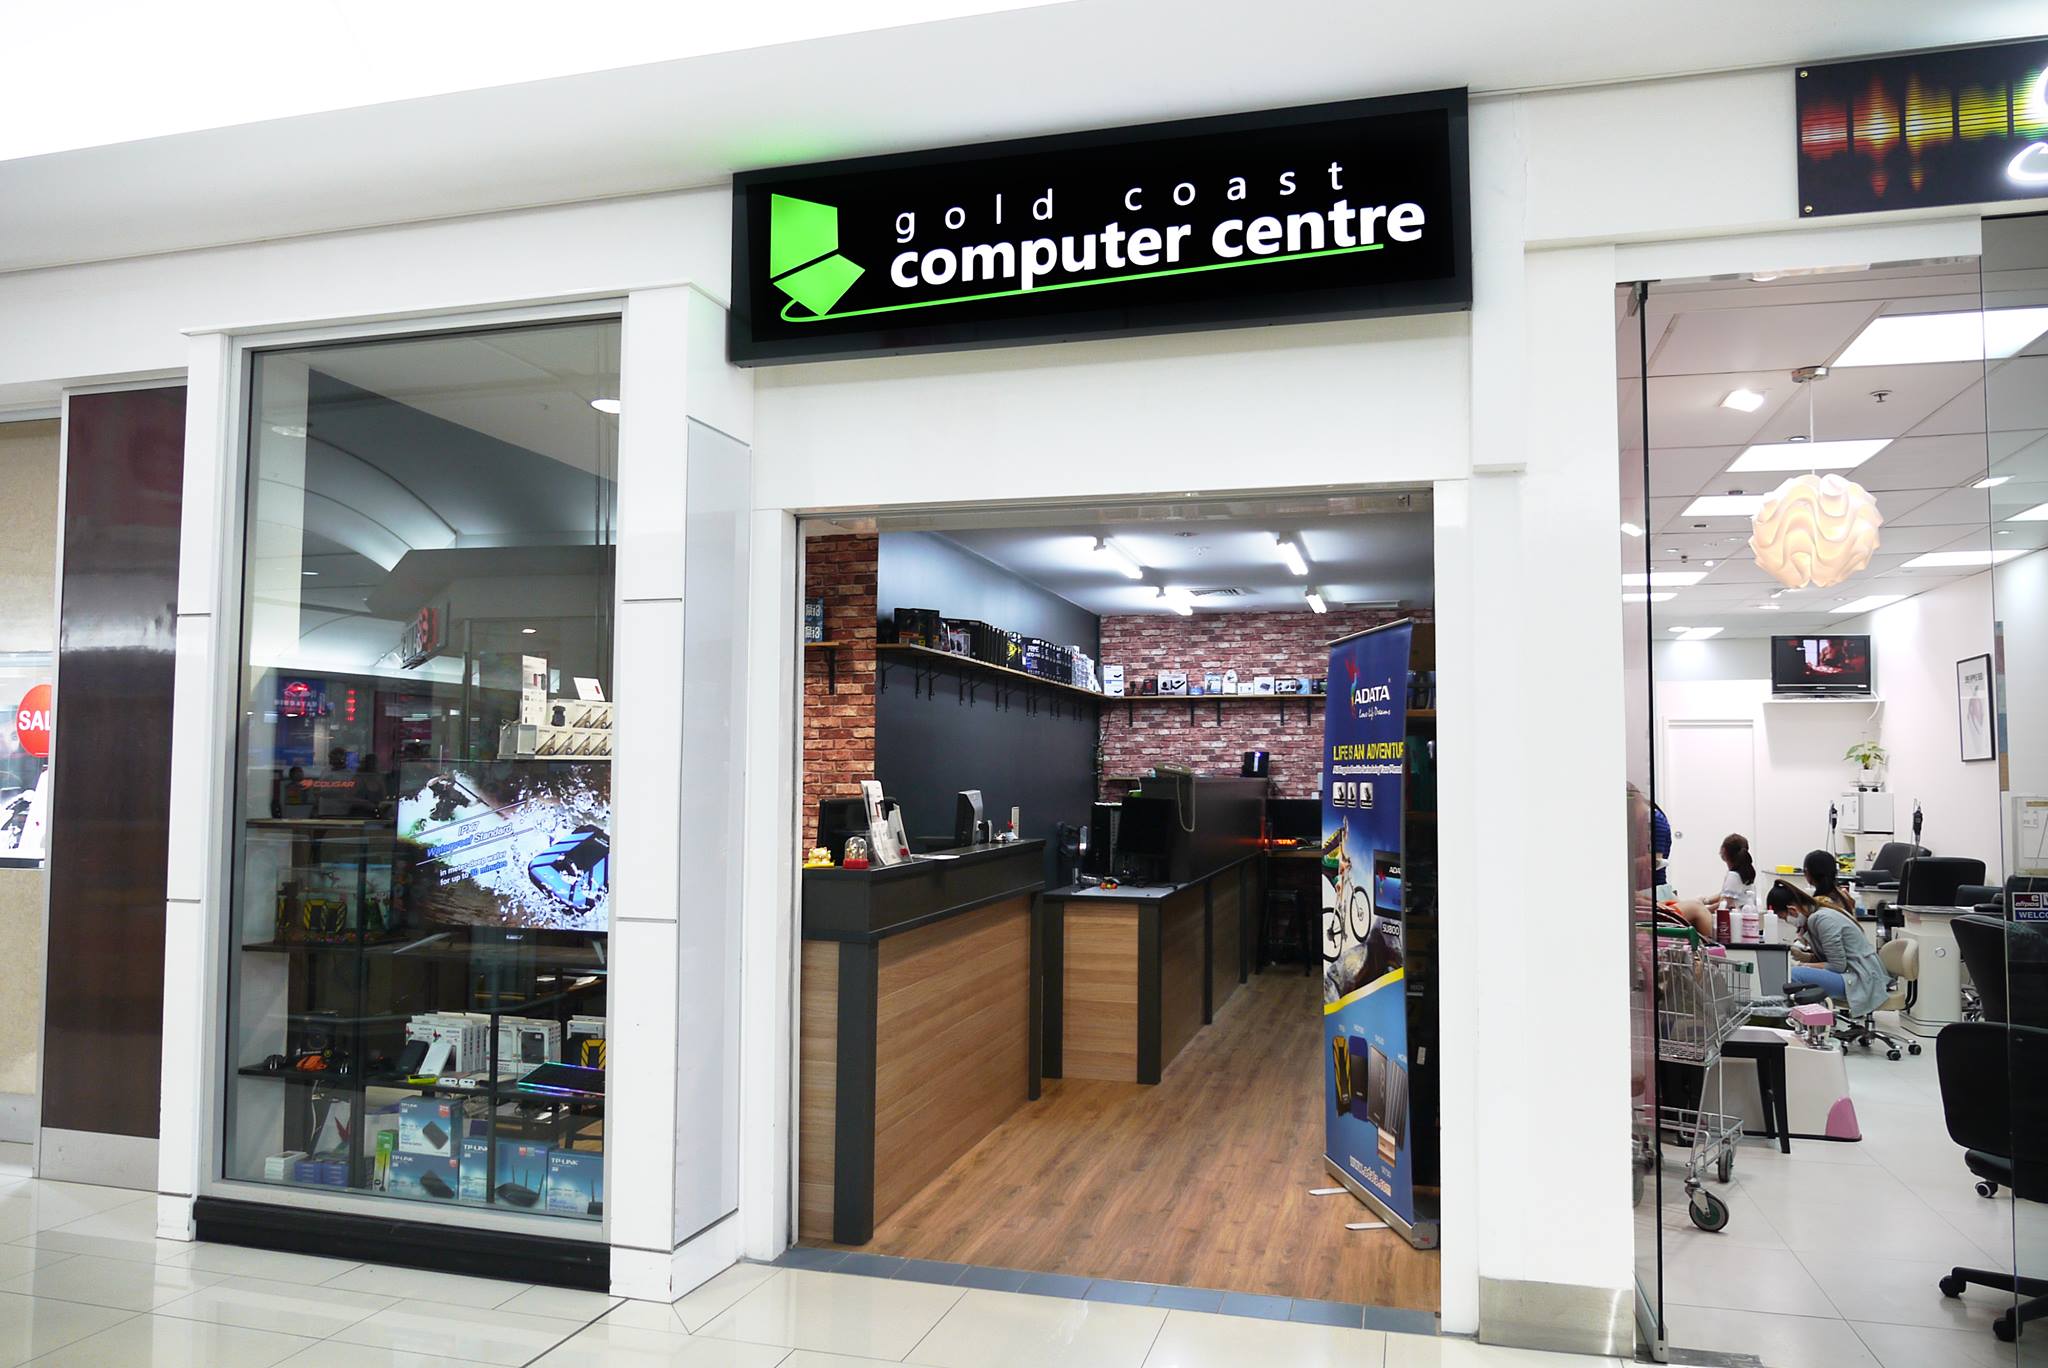 5 Best Computer Stores in Gold Coast - Top Rated Computer Stores